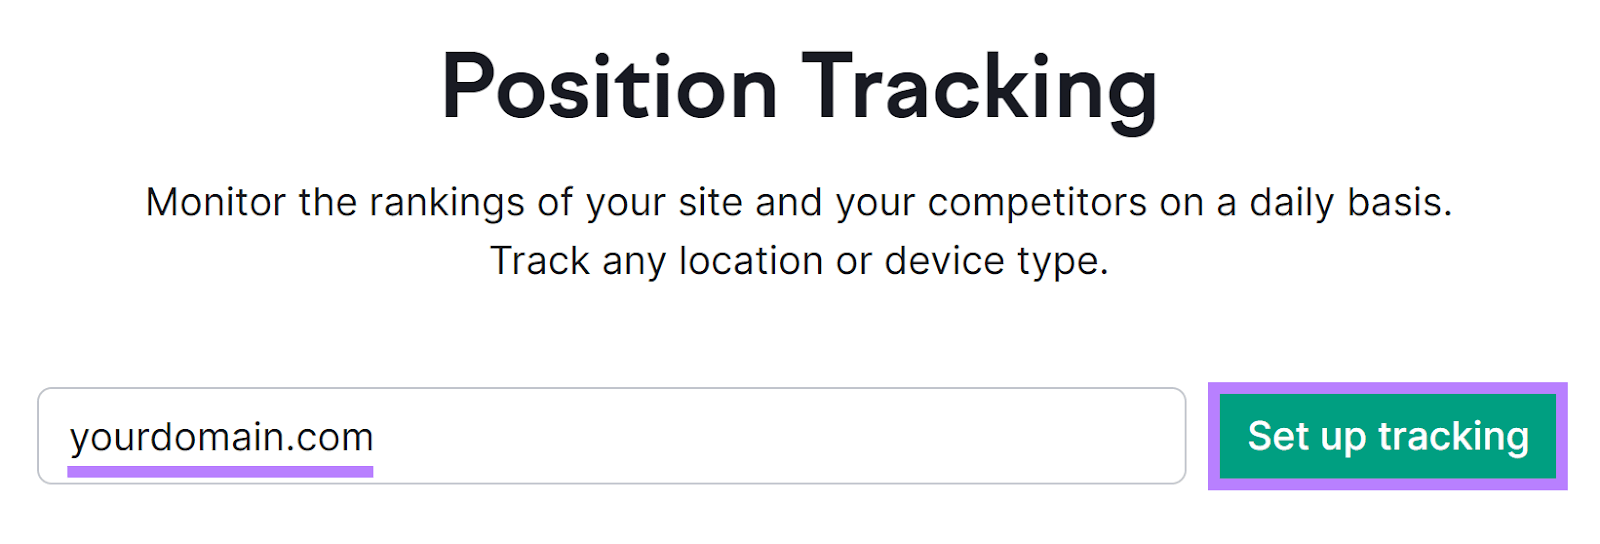 Semrush Position Tracking start page with 'yourdomain.com' in input field and 'Set up tracking' button highlighted.